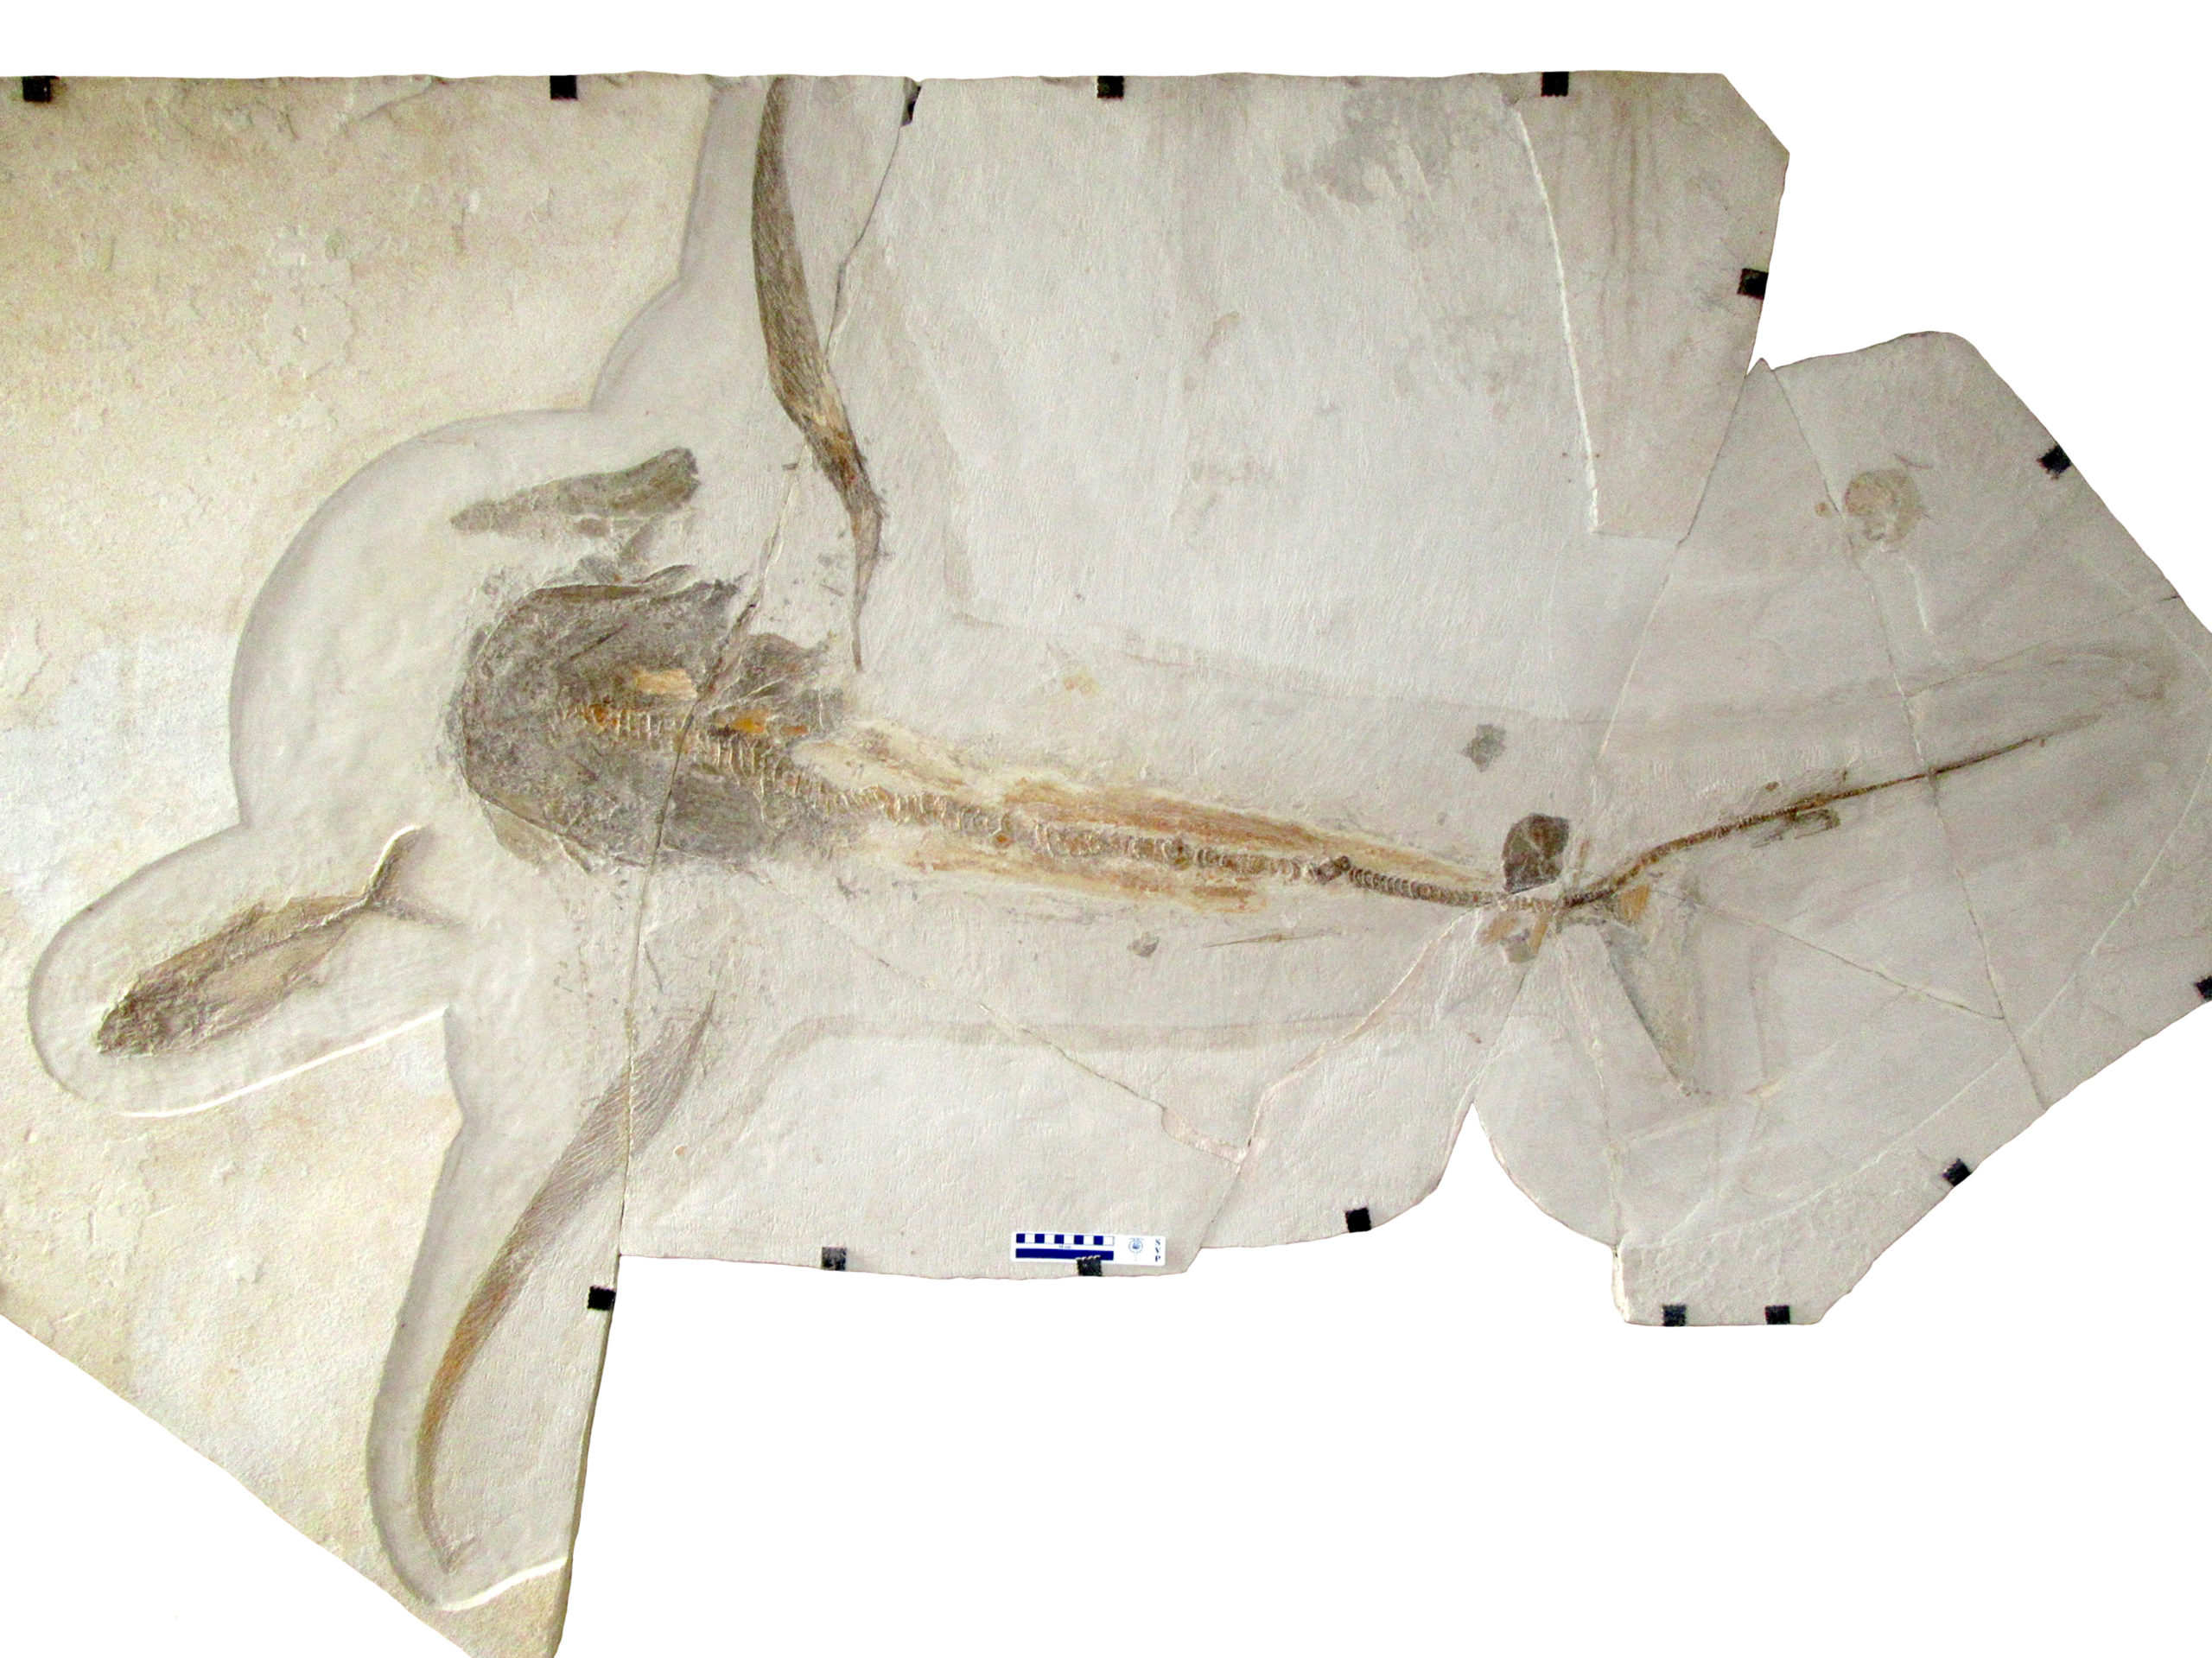 The shark fossil came with three bonus fossil fish and an ammonite (top right). (Image: Vullo et al., Science (2021))